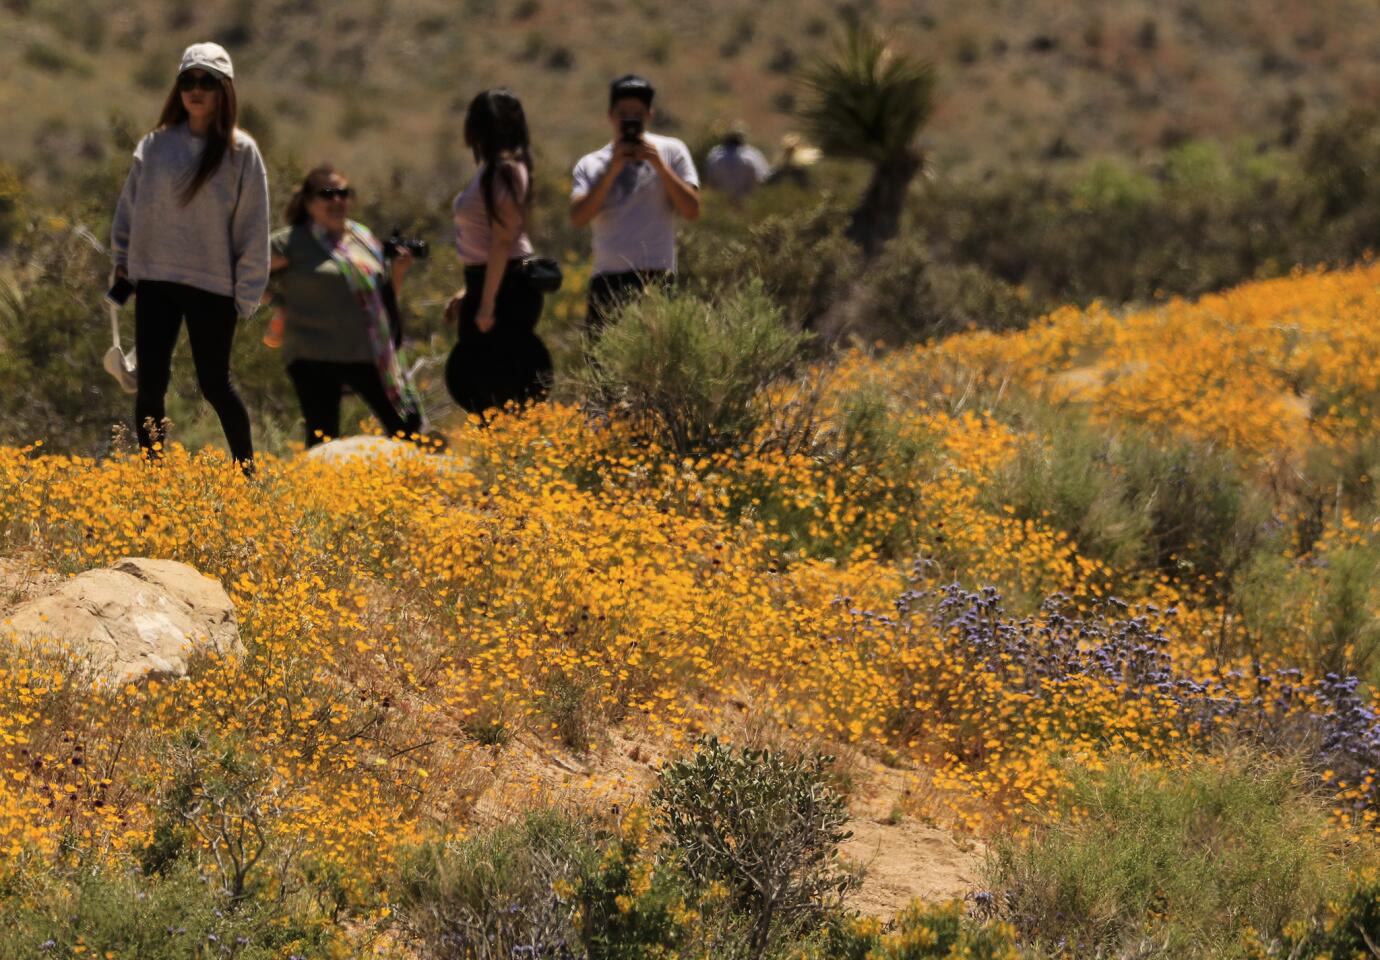 JOSHUA TREE NATIONAL PARK ,CA., APRIL 6, 2019: After a long wet winter the wildflowers are blooming all over Joshua Tree National Park with a great show of color that is attracting visitors to this unique high desert destination April 6, 2019 (Mark Boster For the LA Times).